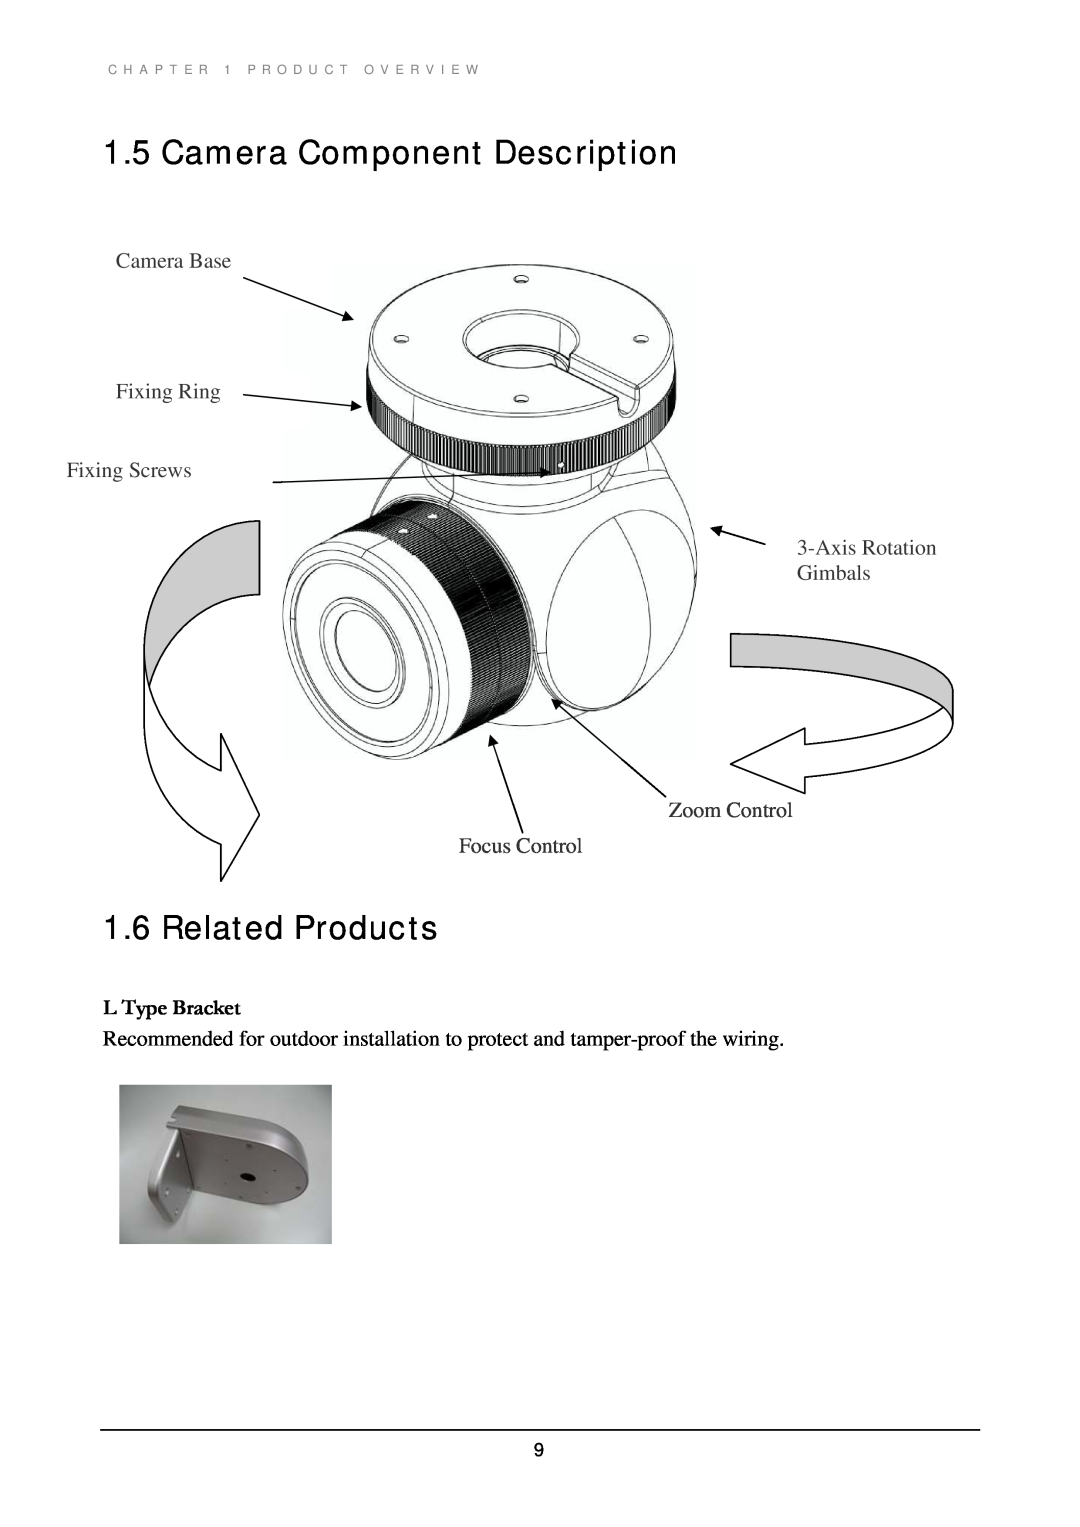 EverFocus EBD430 manual Camera Component Description, Related Products, Zoom Control Focus Control, L Type Bracket 